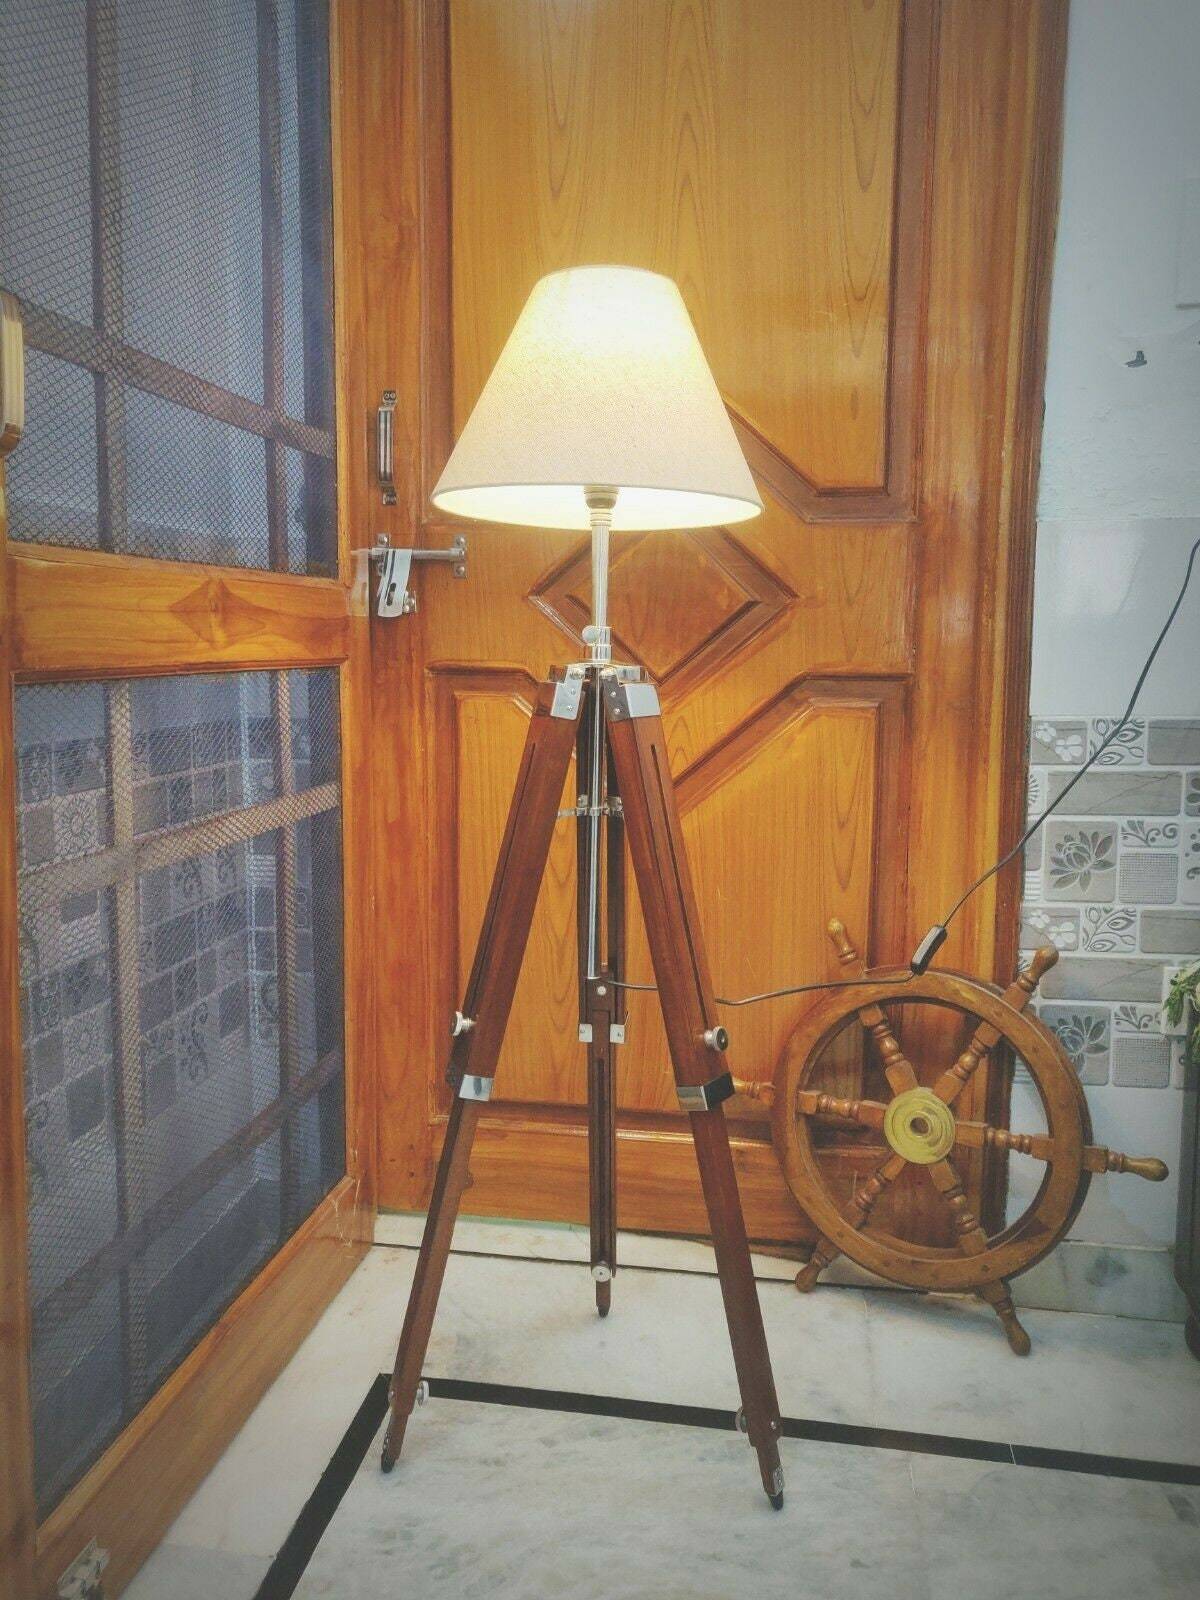 Nautical Vintage Floor Lamp Shade Wooden Tripod Stand Home Office Corner Decor